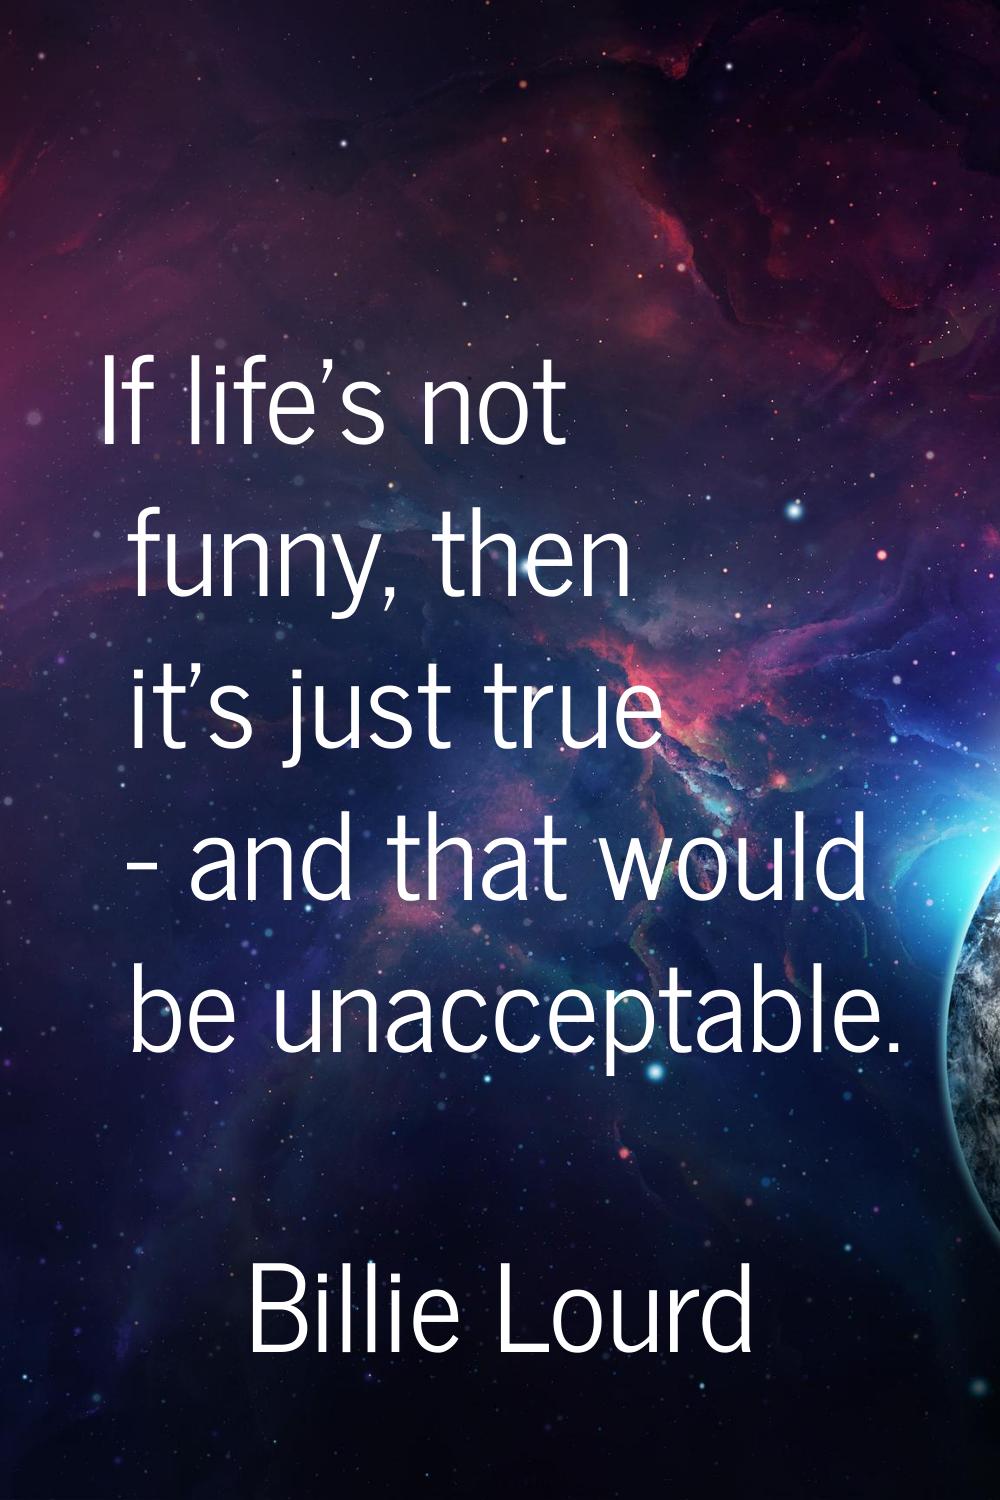 If life's not funny, then it's just true - and that would be unacceptable.